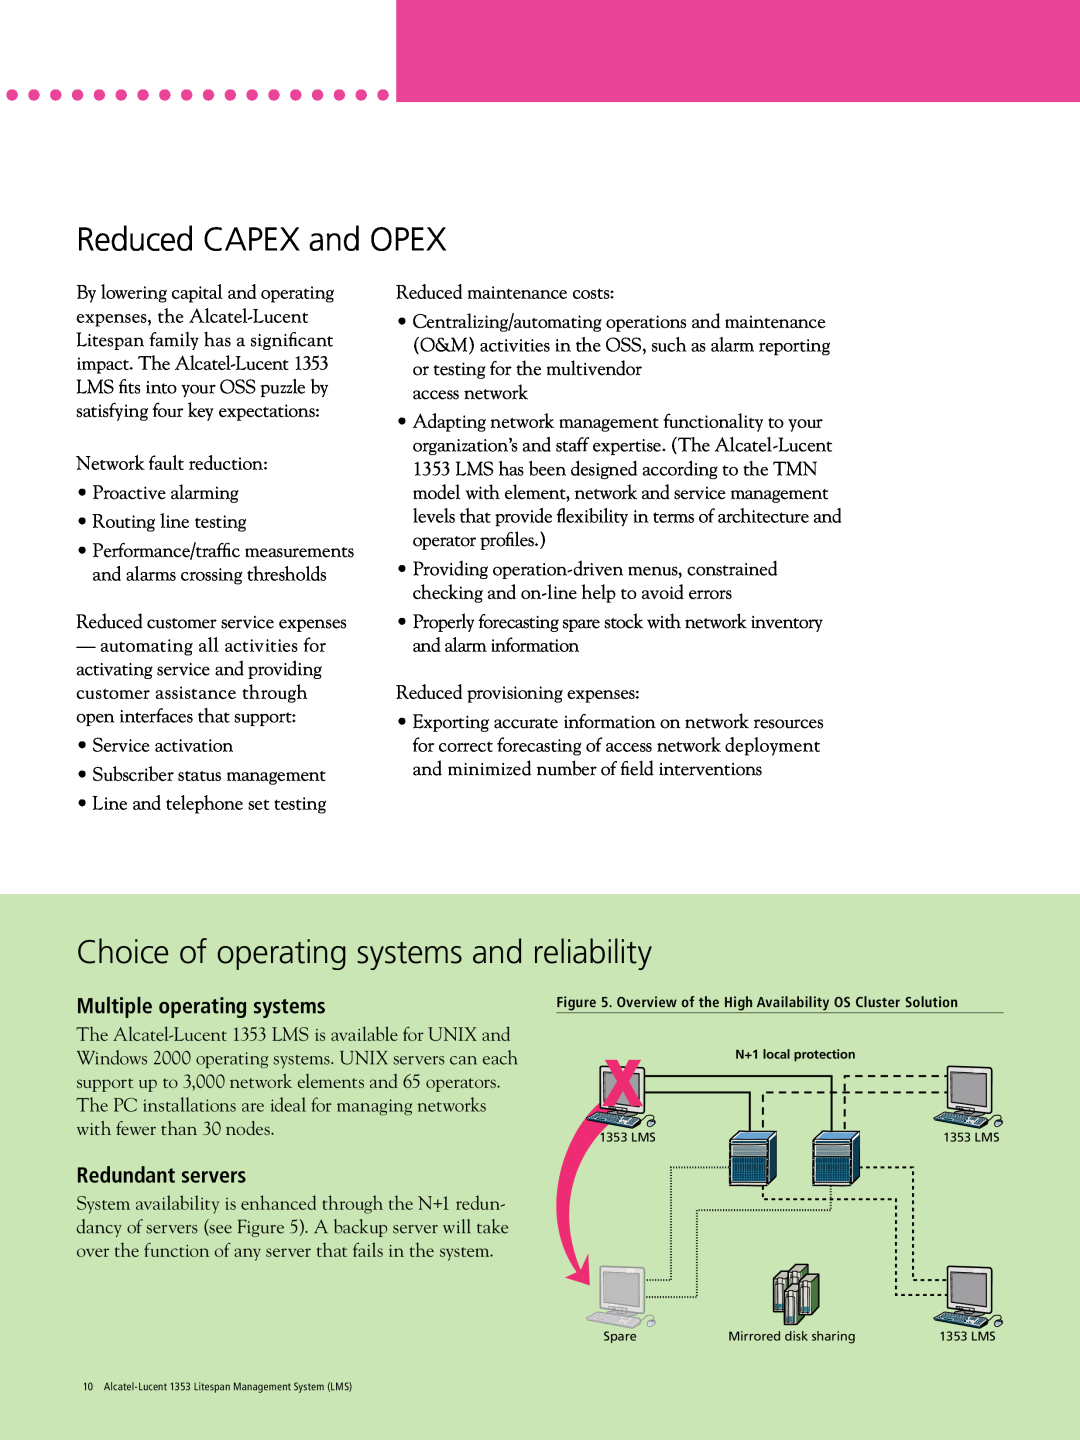 Alcatel-Lucent 1353 manual Reduced CAPEX and OPEX, Choice of operating systems and reliability, Multiple operating systems 